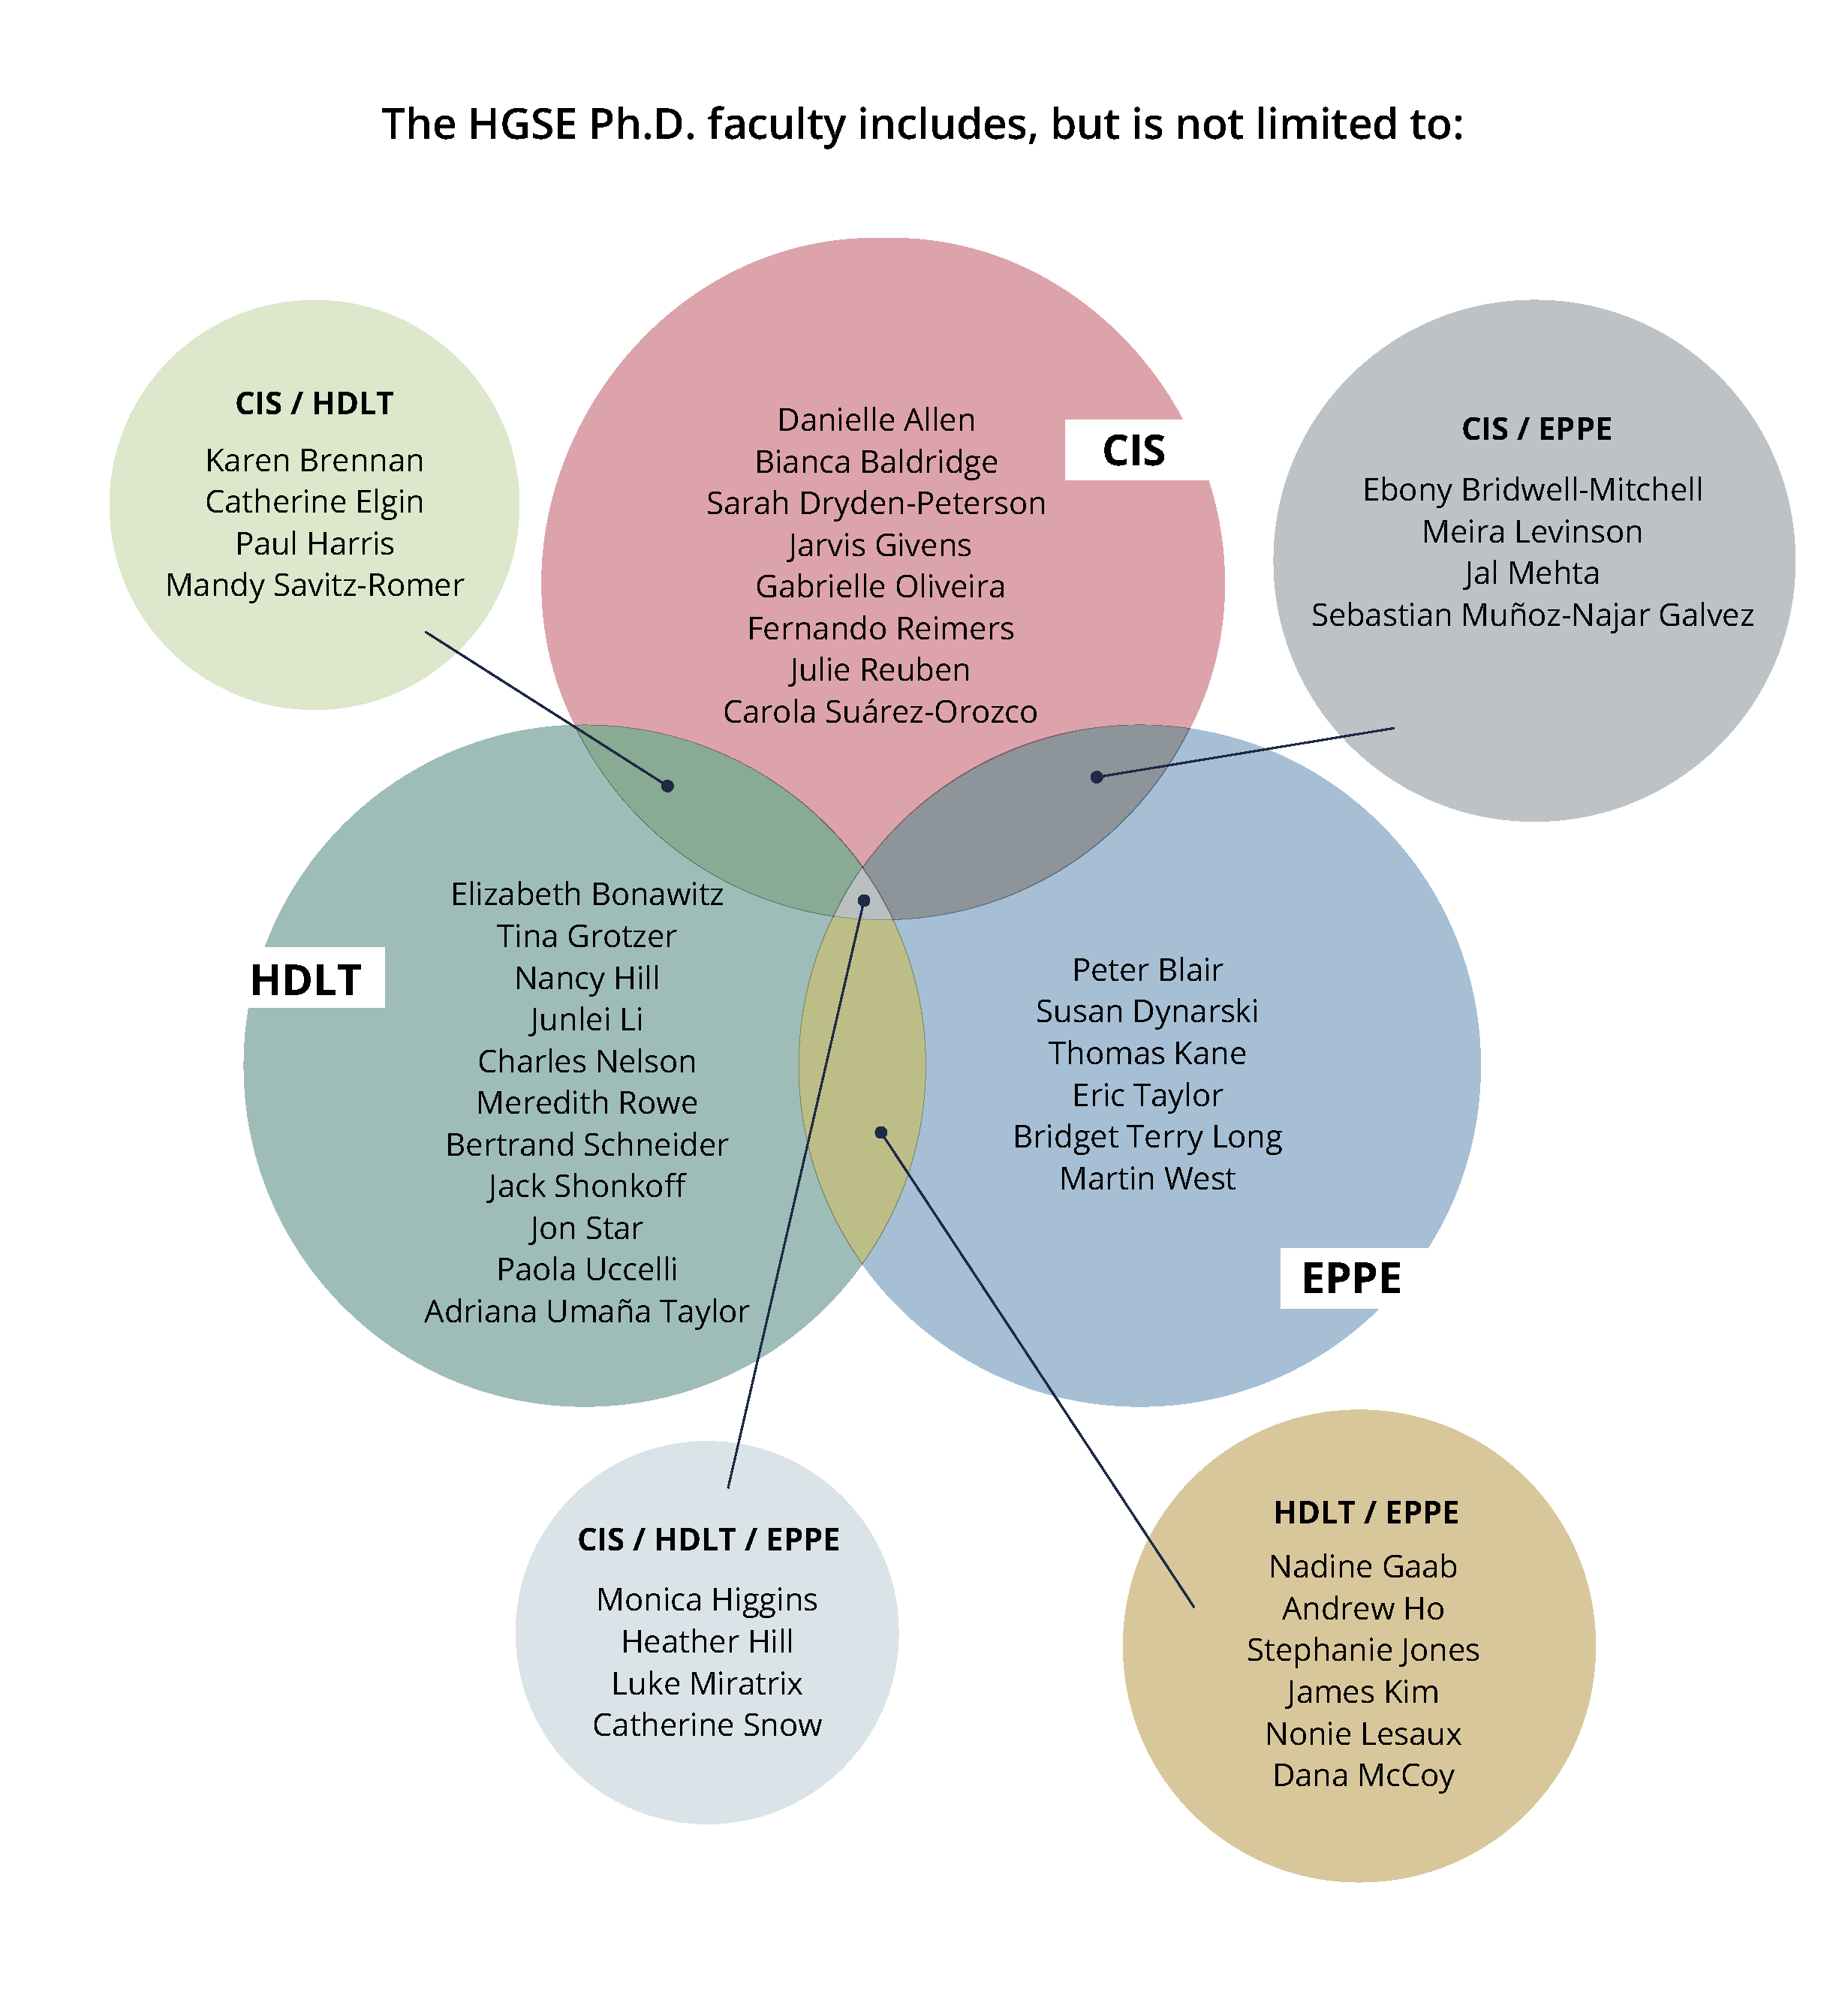 A diagram showing the makeup of the Faculty for the HGSE PhD. Described below in text content.